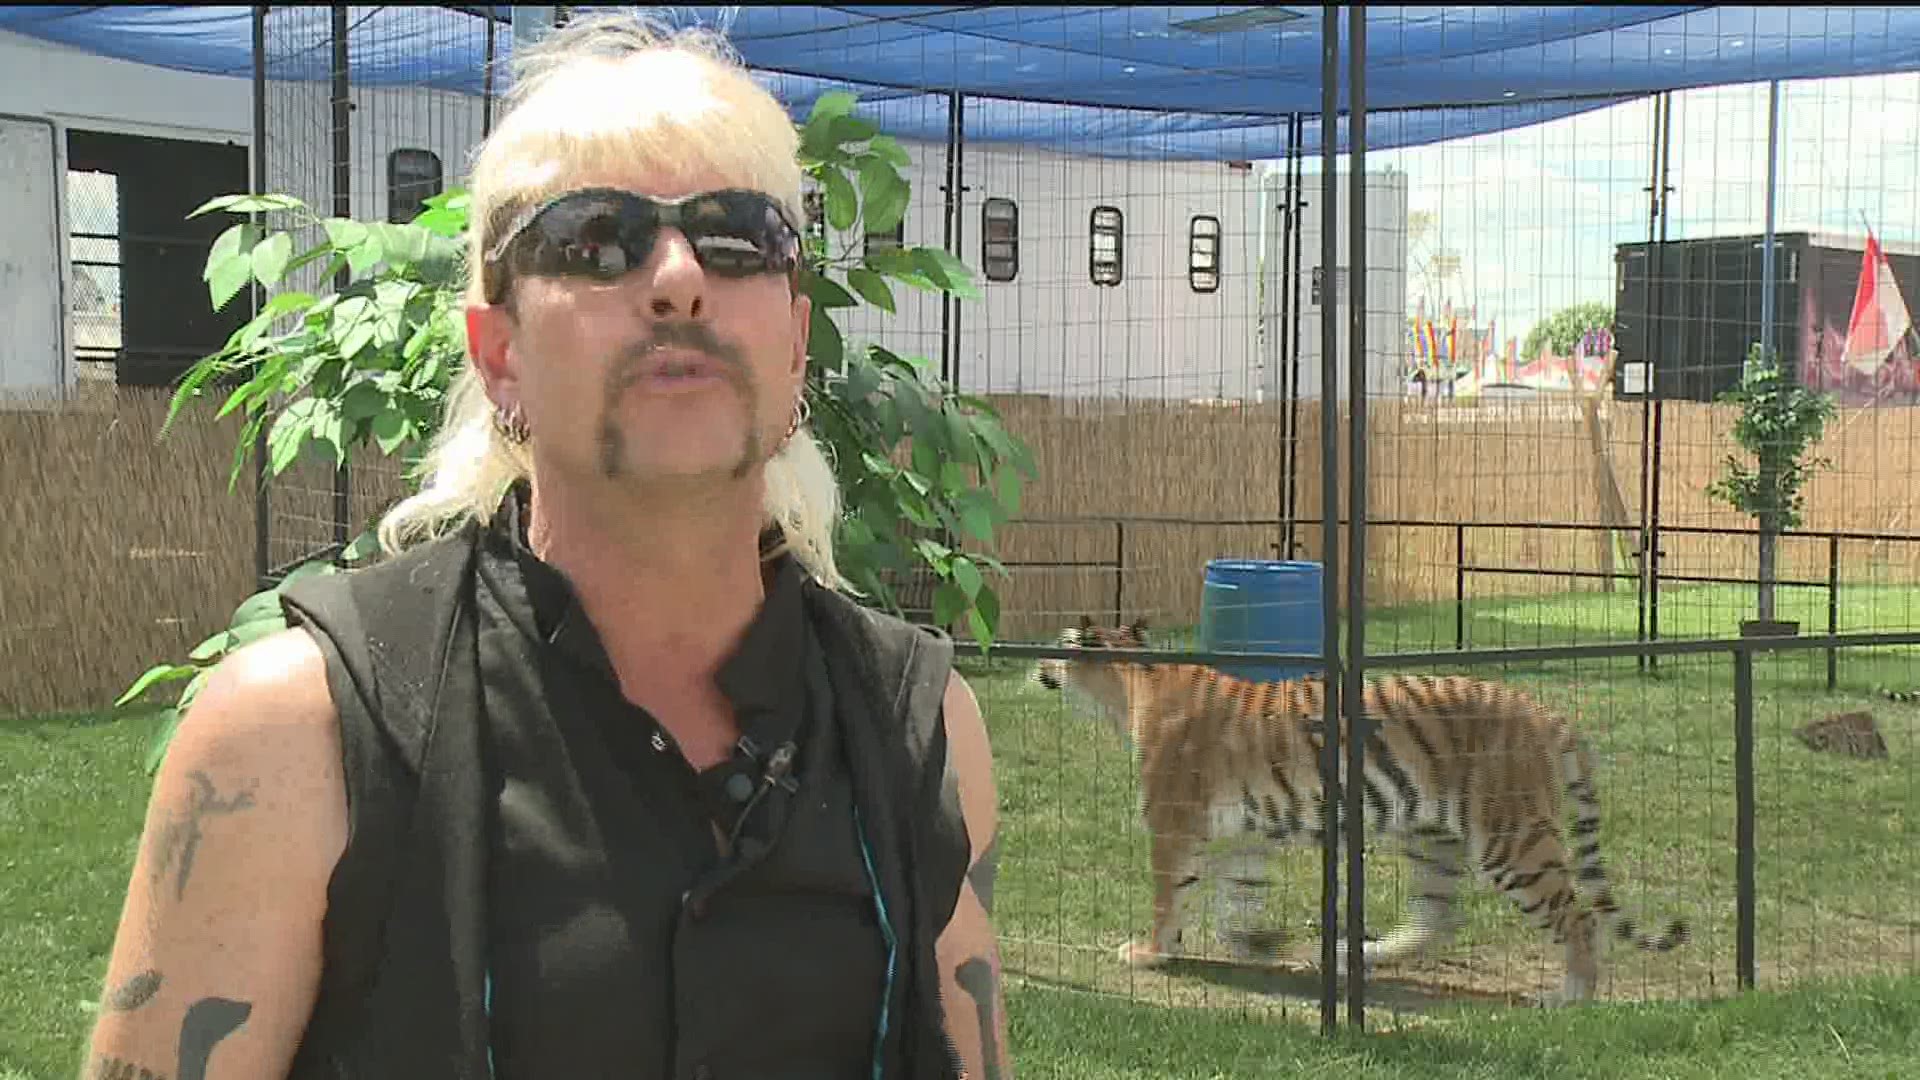 Before the popular docuseries "Tiger King" was filmed and released, "Joe Exotic" performed at the Mississippi Valley Fair in August 2013.